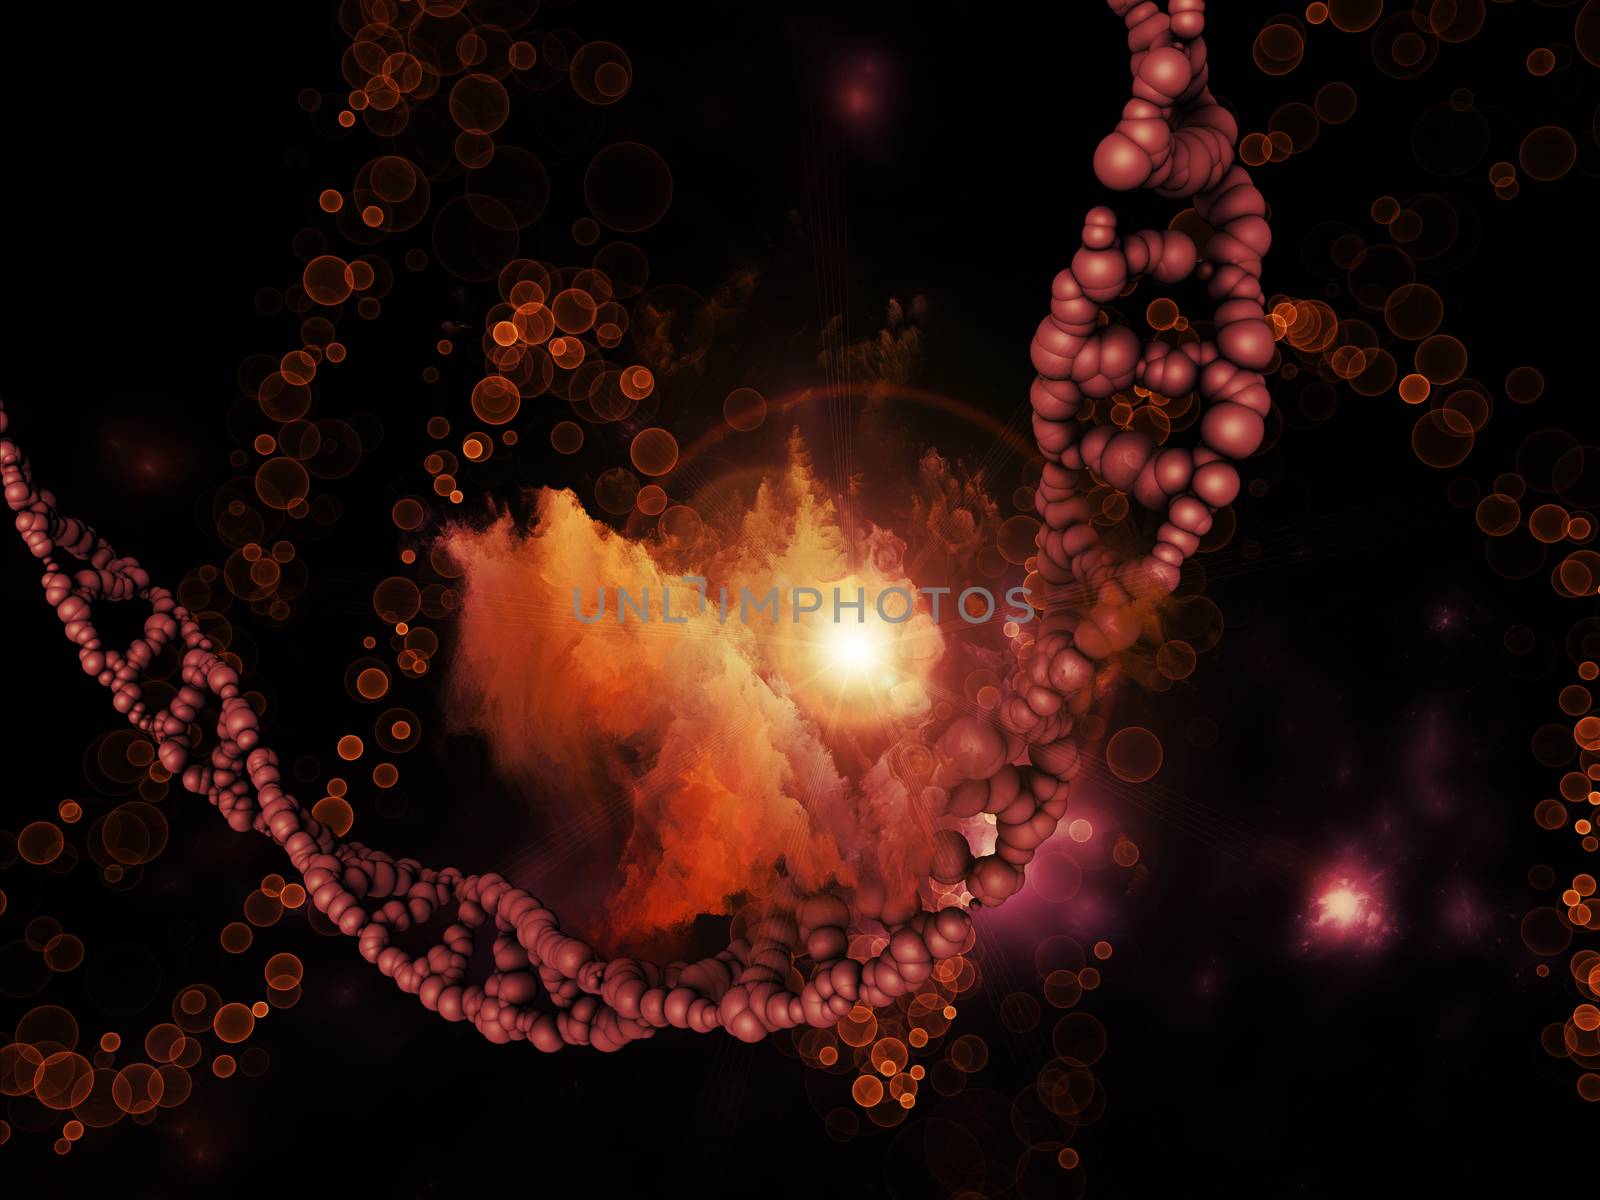 Molecular Dreams series. Design composed of conceptual atoms, molecules and fractal elements as a metaphor on the subject of biology, chemistry, technology, science and education